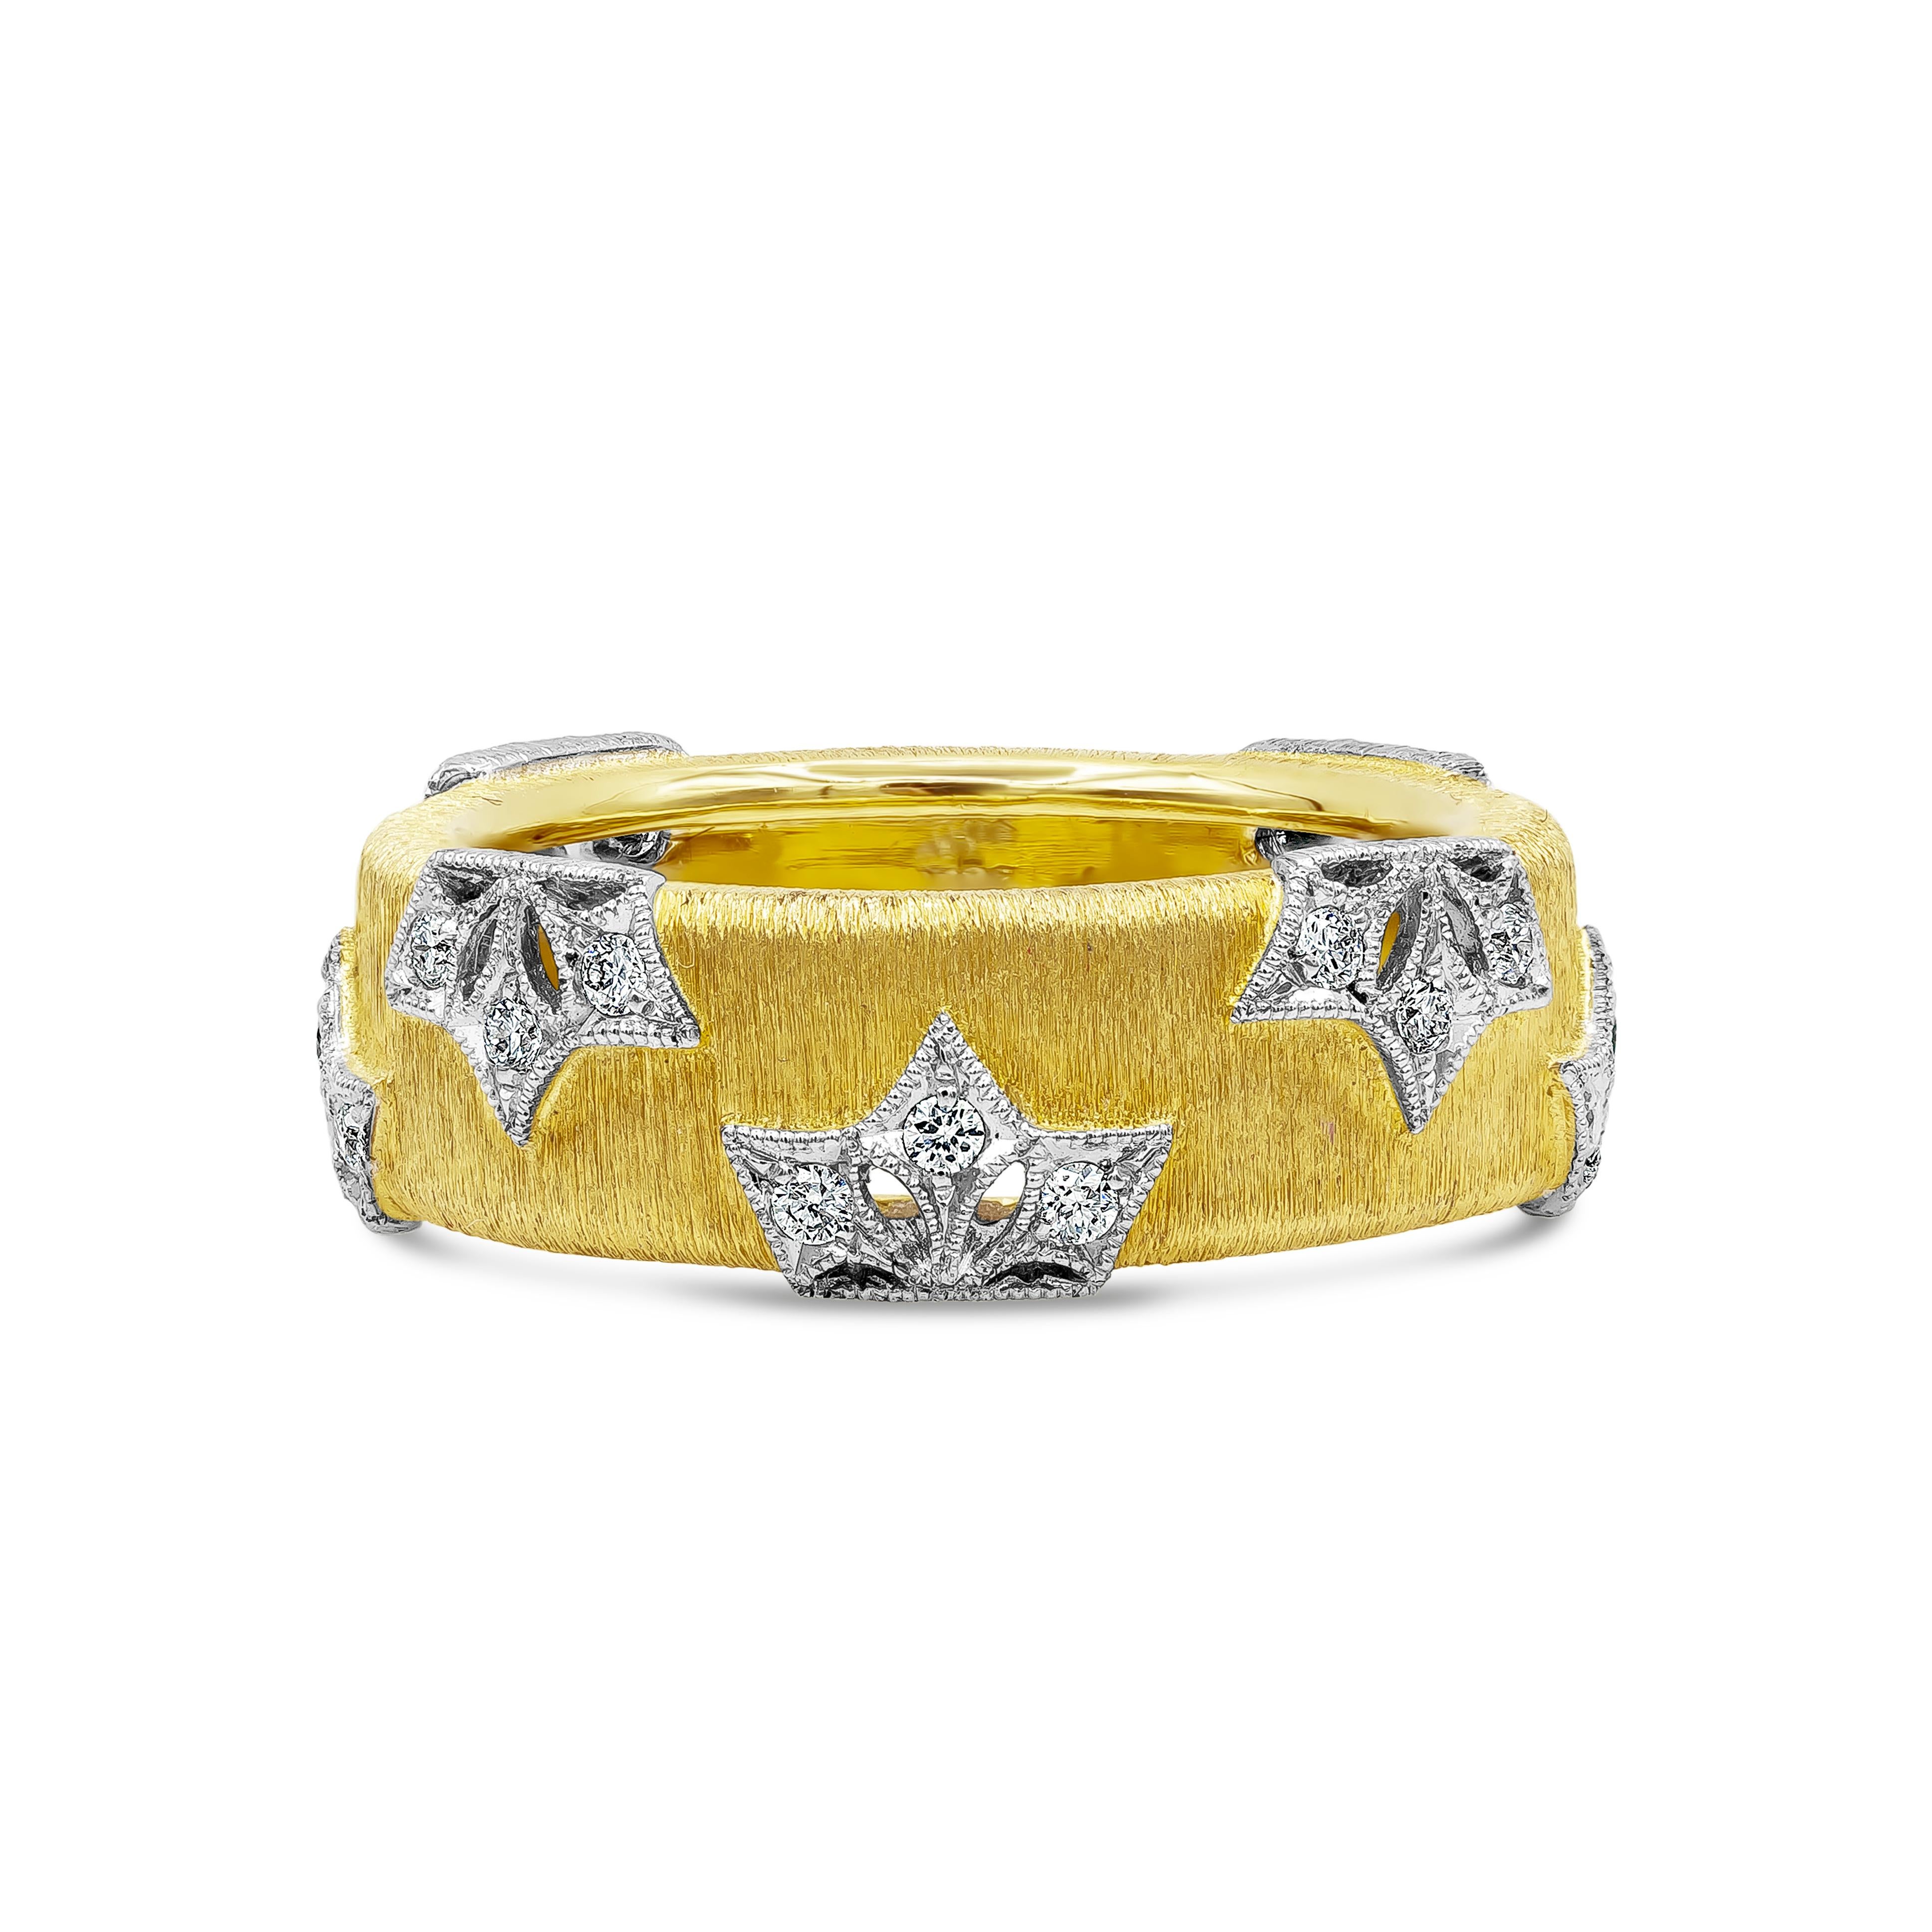 An enticing fashion ring showcasing a brushed and domed yellow gold finish accented with a crown design made in white gold. Crown is accented with round brilliant diamonds. Diamonds weigh 0.25 carats total and are approximately F color, VS clarity.